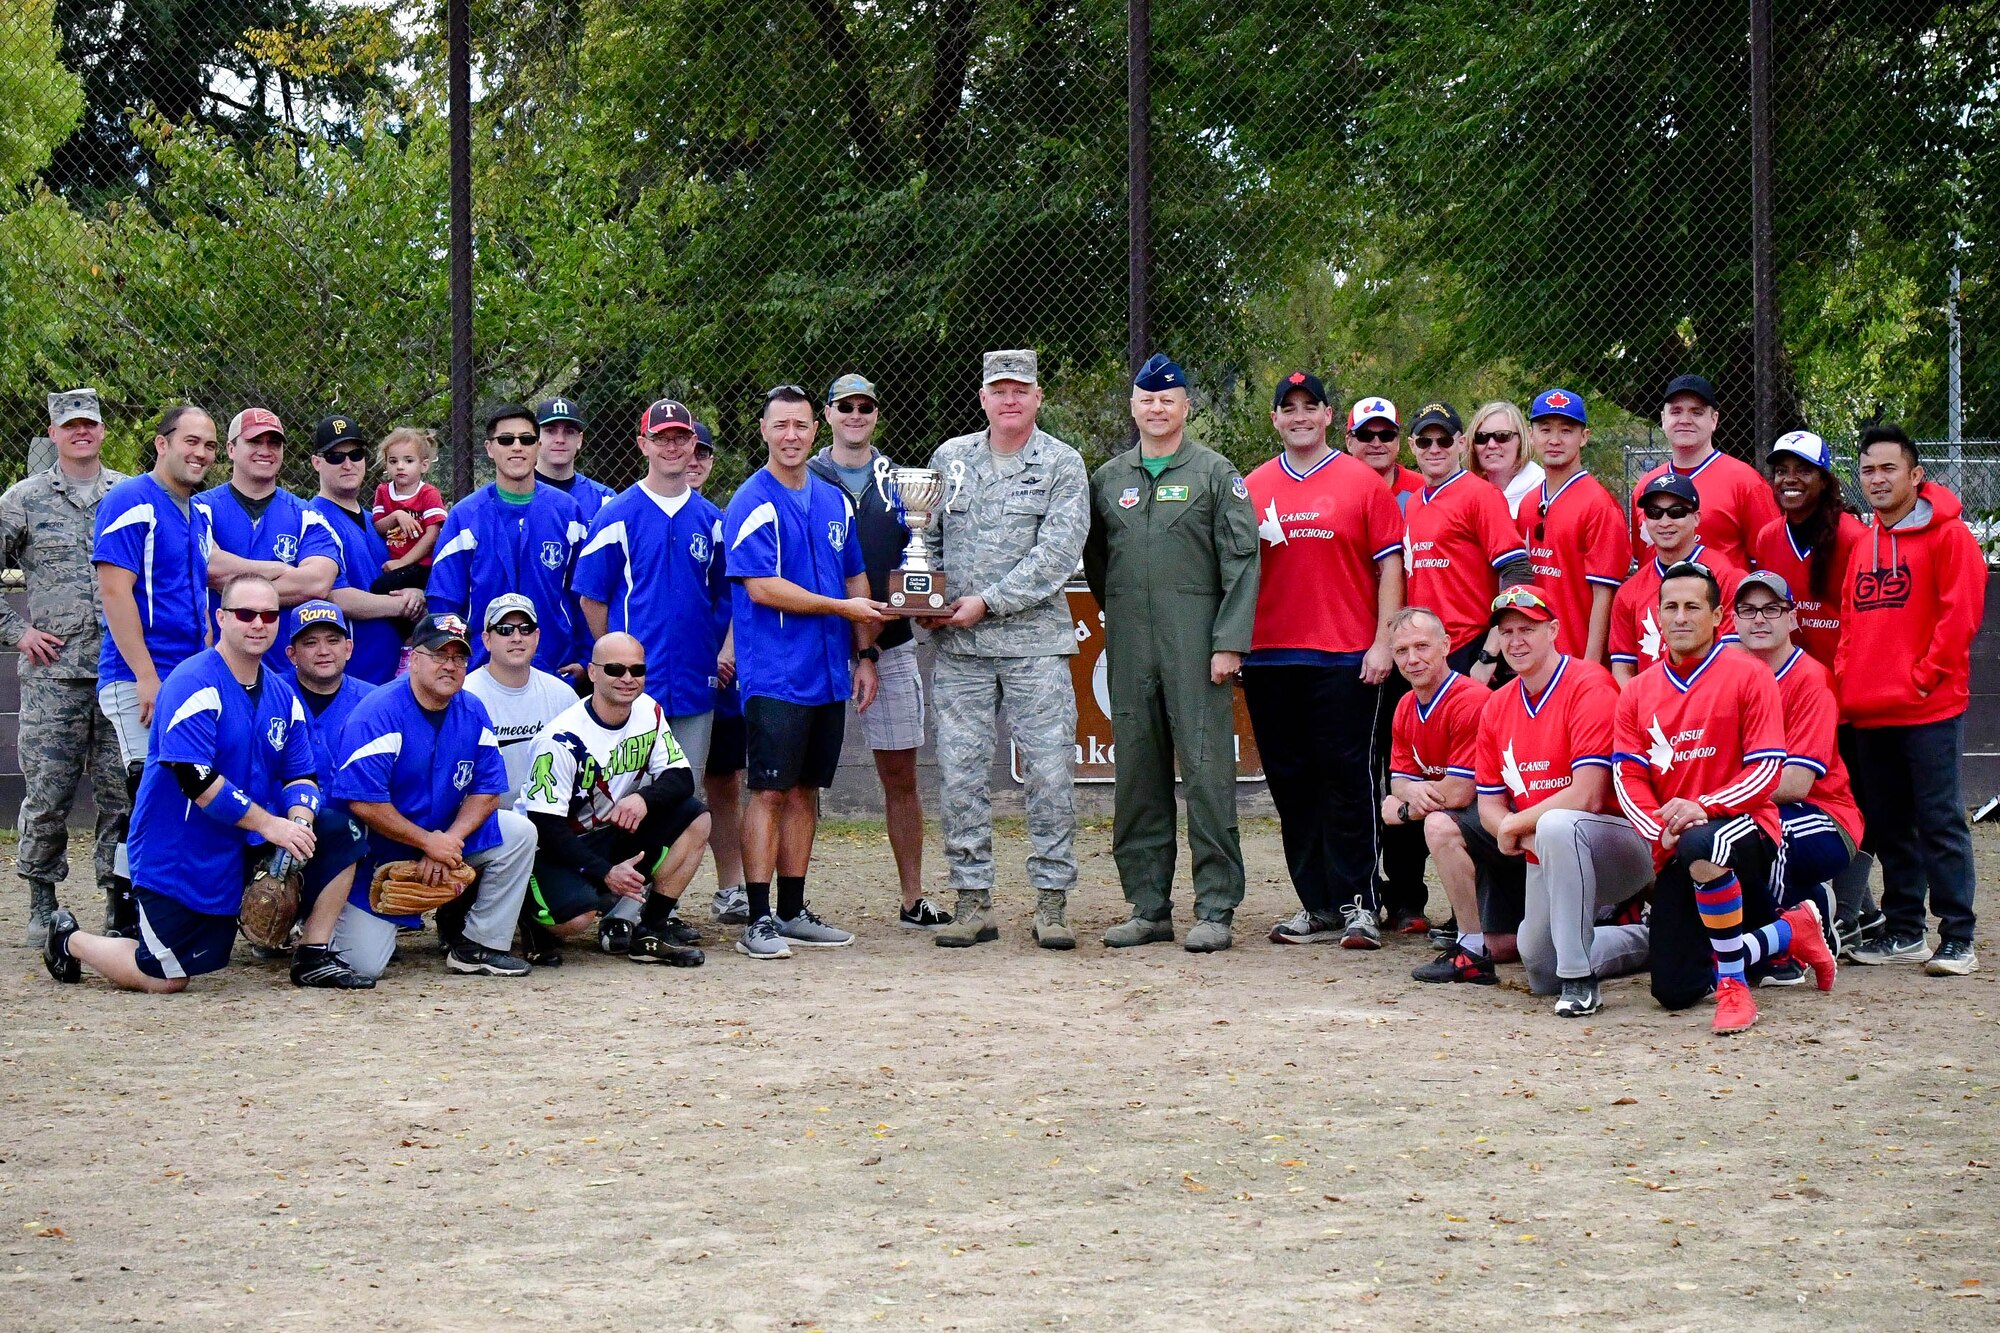 U.S. wins the Western Air Defense Sector's U.S. vs Canada Softball Challenge Cup by a final score of 25-10.  Col. William Krueger, 225th Air Defense Group commander (center), and Chief Master Sgt. Allan Lawson, 225th Air Defense Squadron senior enlisted advisor, hold the Challenge Cup trophy.